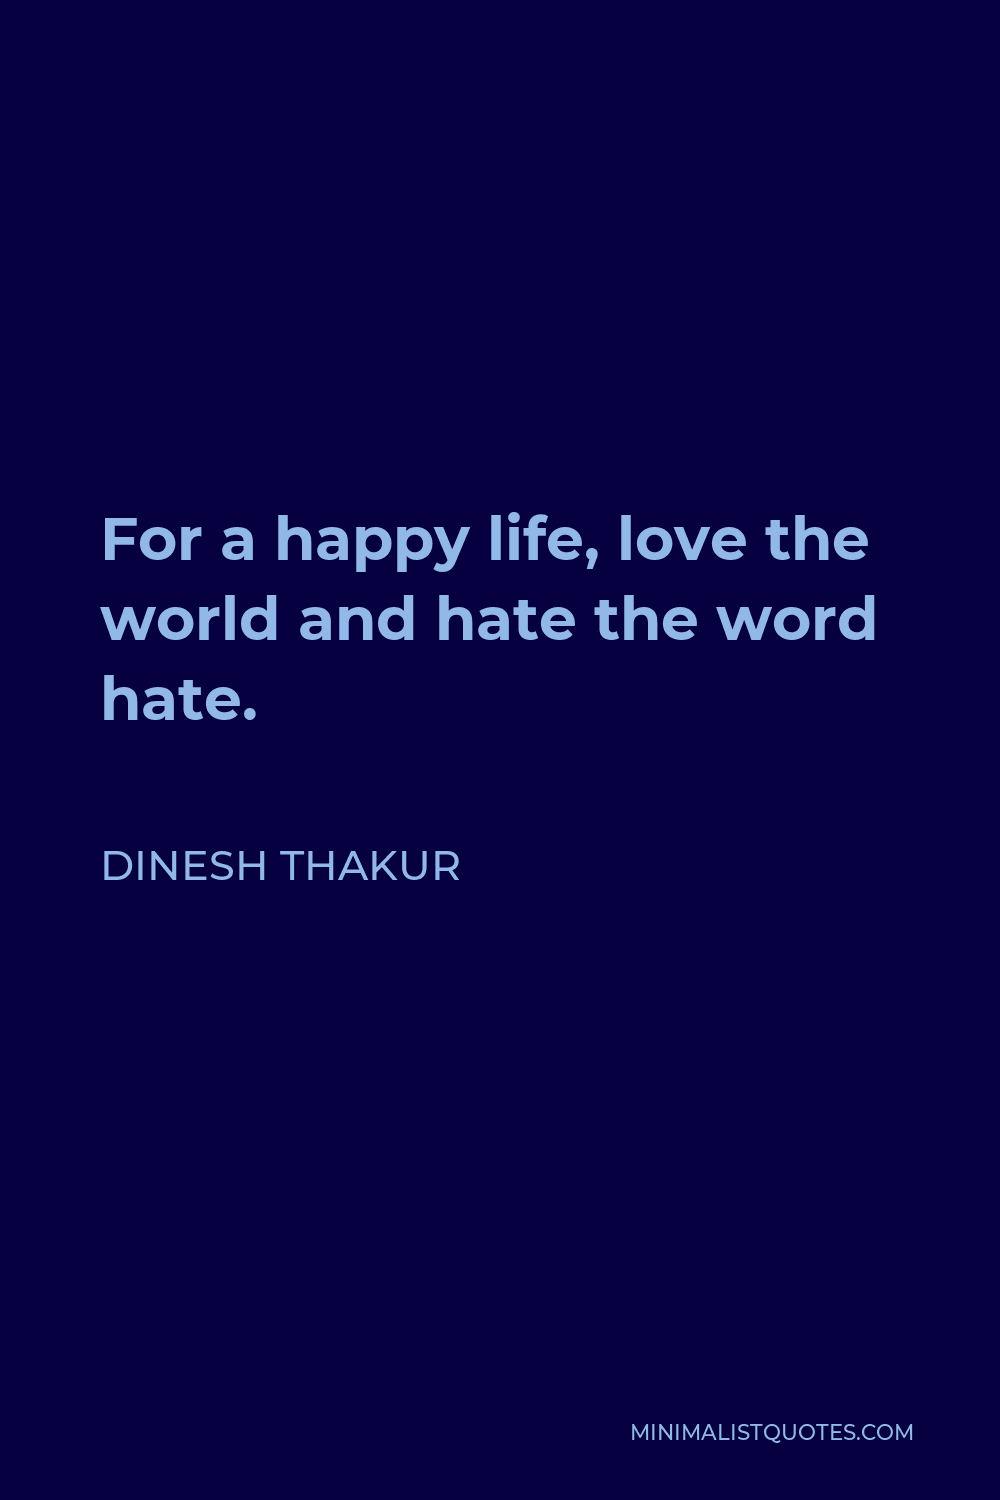 Dinesh Thakur Quote - For a happy life, love the world and hate the word hate.